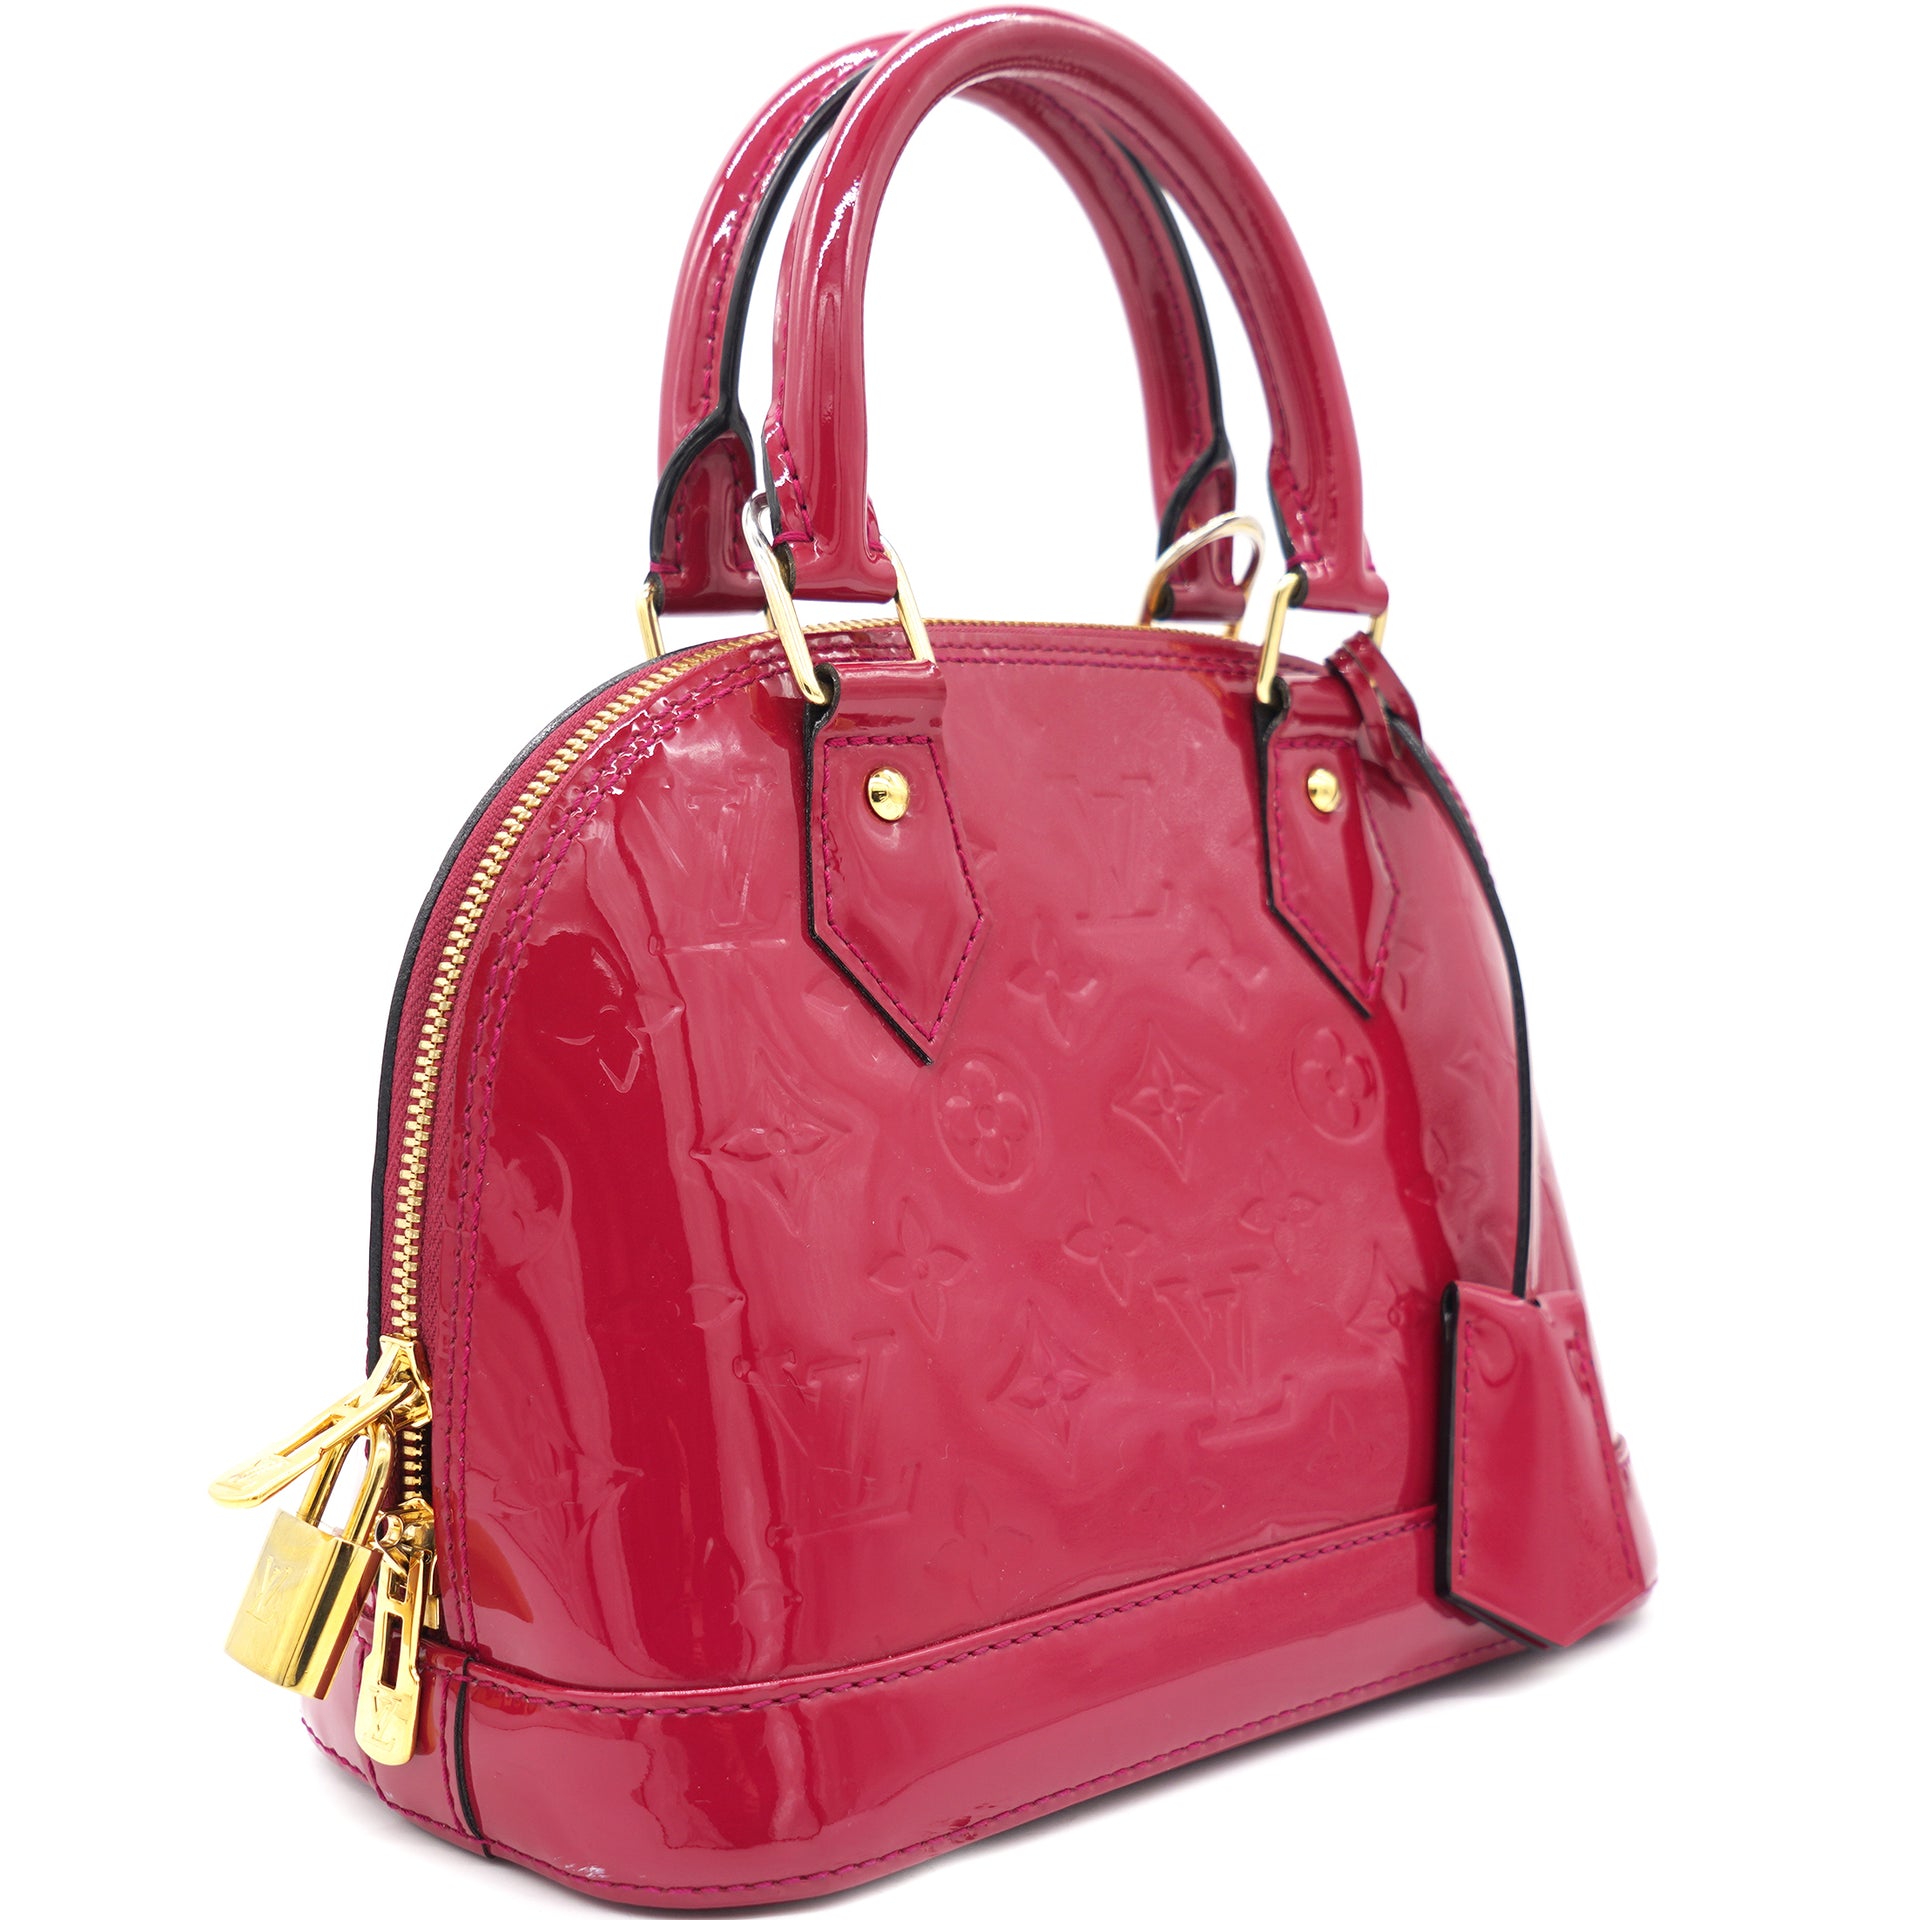 Louis Vuitton Alma Shoulder Bag in Red Patent Leather